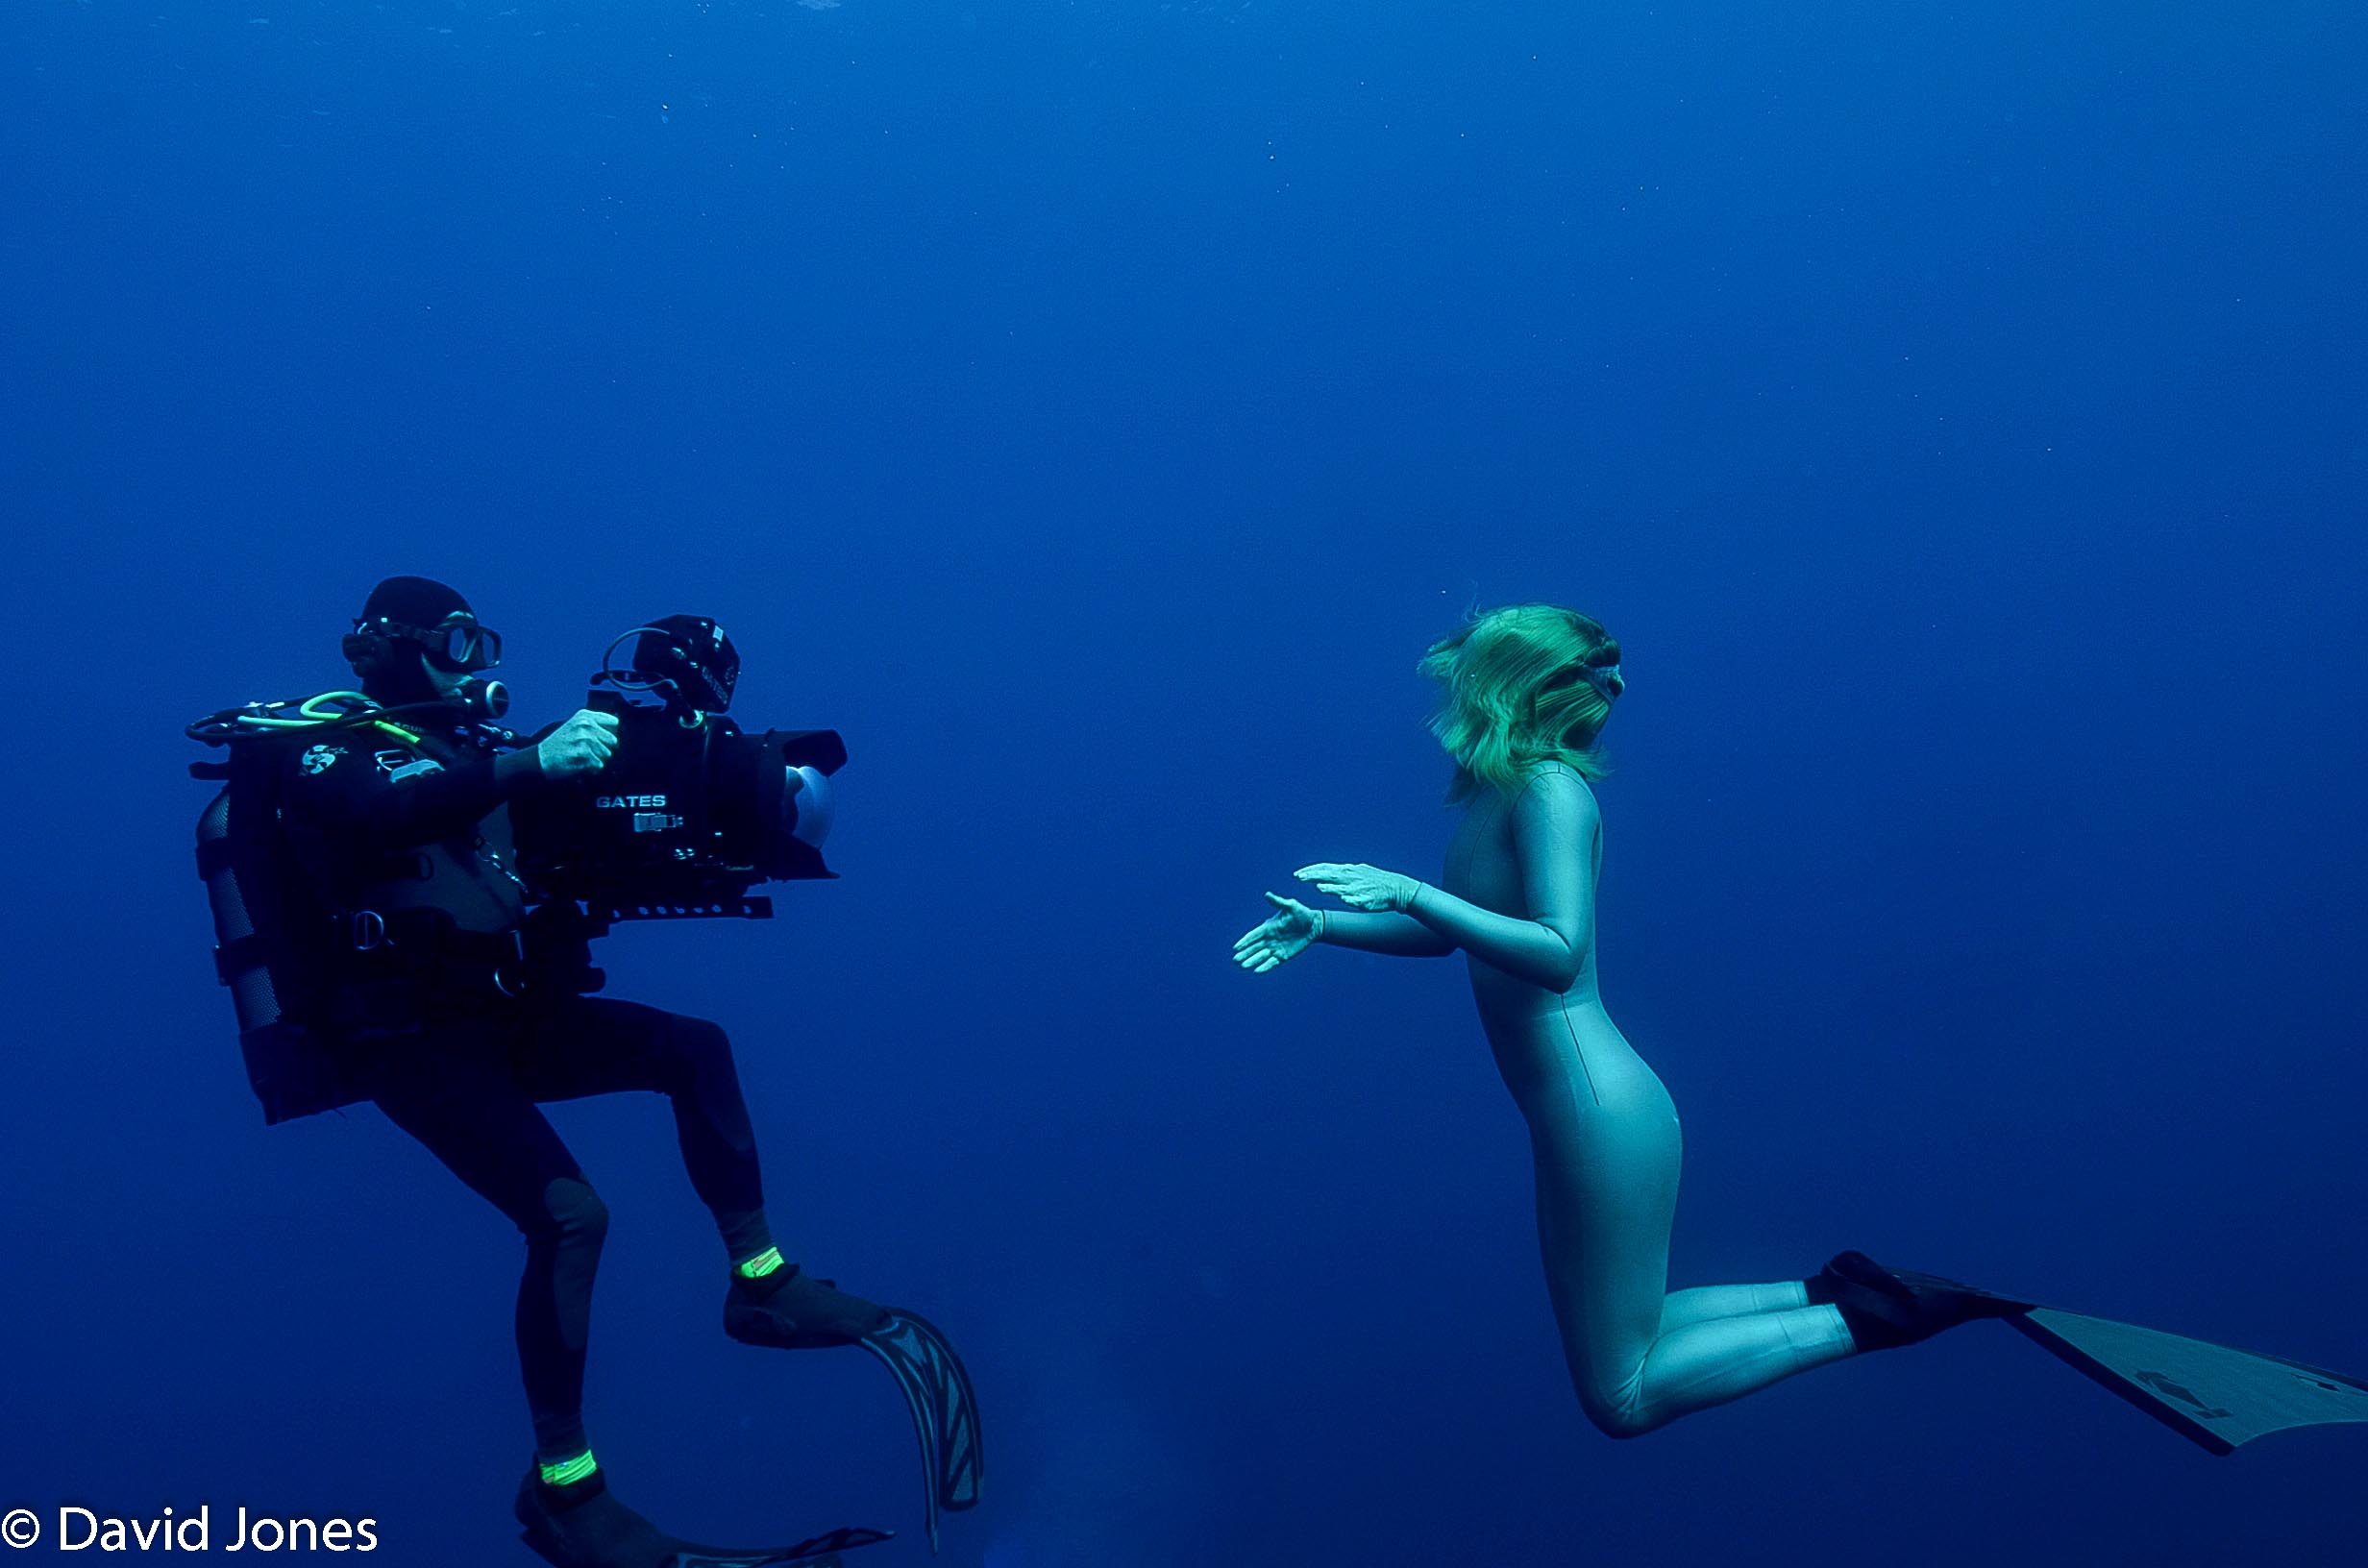 Michael Pitts filming Tanya Streeter for A Plastic Ocean